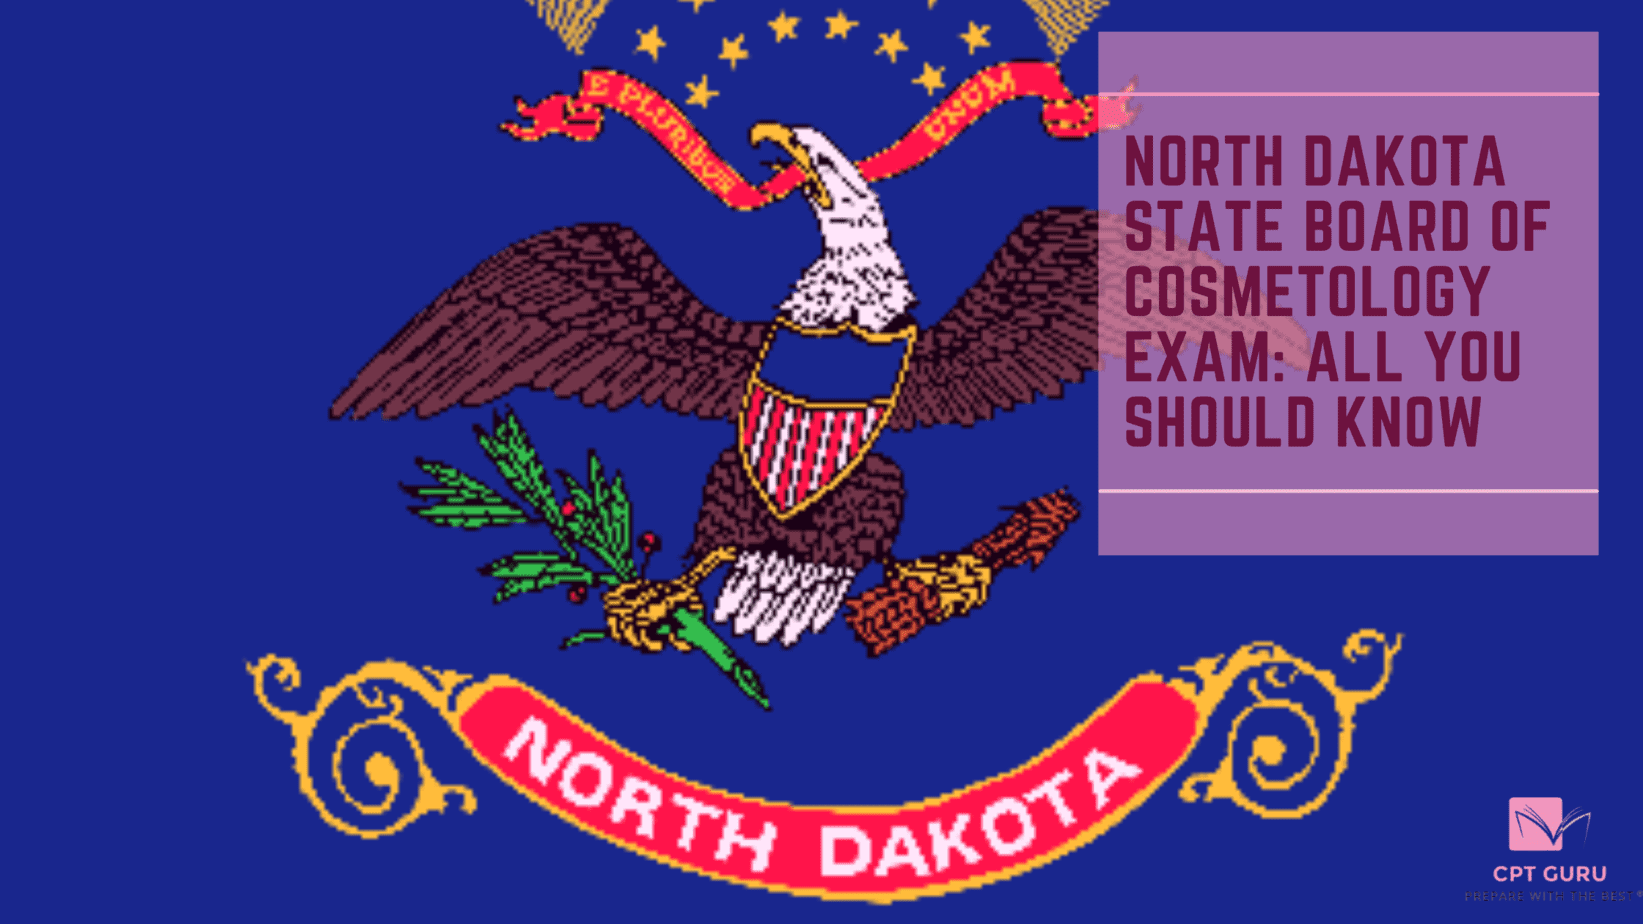 North Dakota State Board of Cosmetology Exam: Free practice test, and everything you need to know